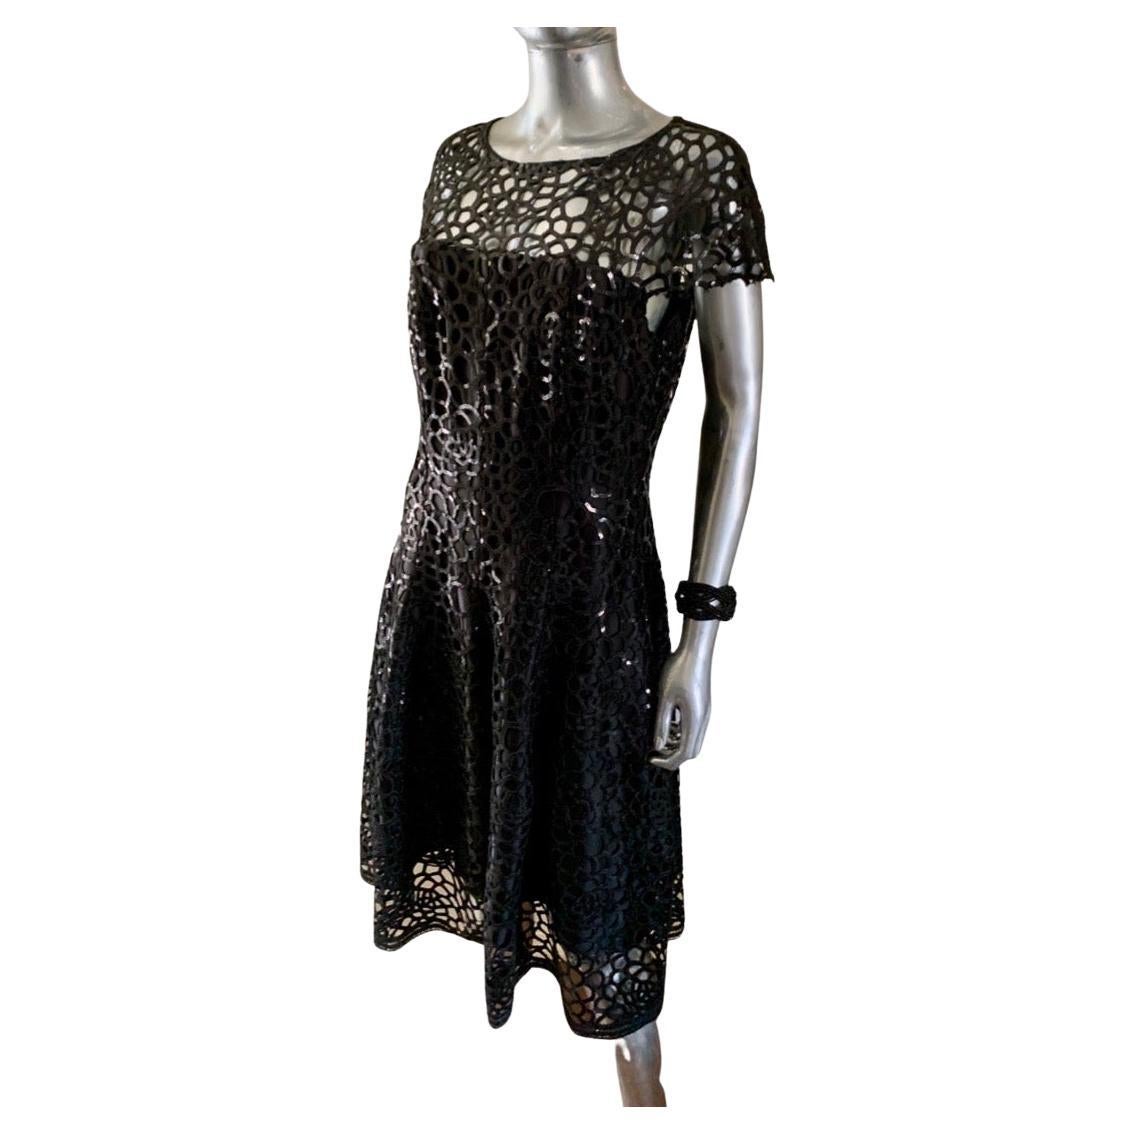 Talbot Runhof Celebrity Owned Black Guipure Lace Sequin Dress, Rare. Size 10 For Sale